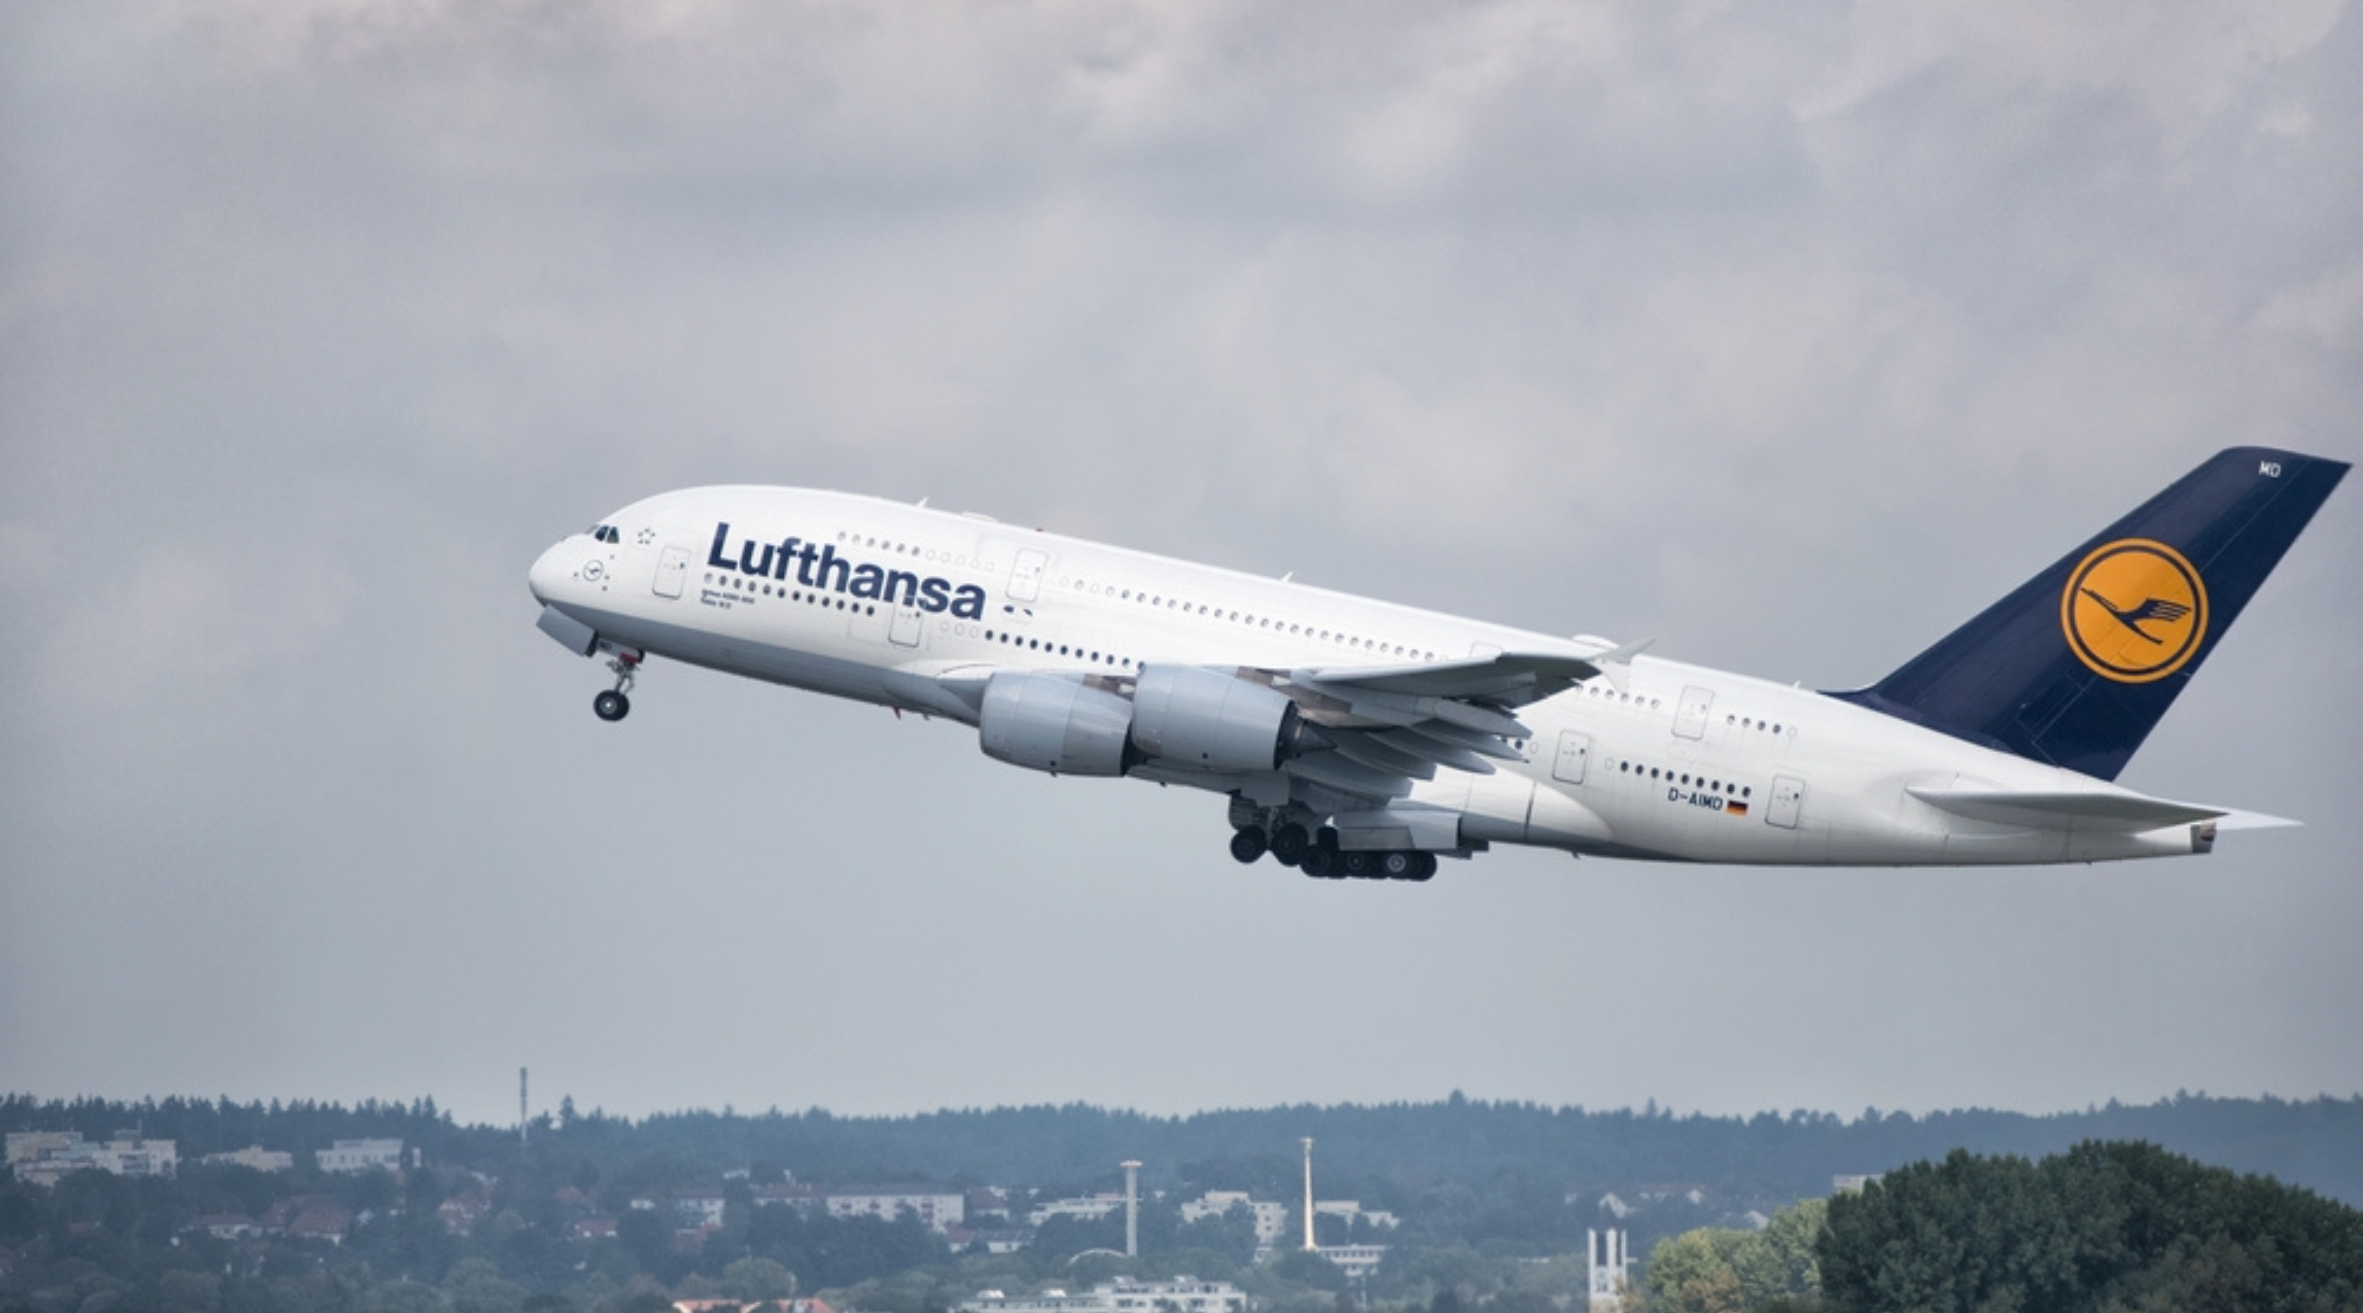 EU Commission launches investigation into Lufthansa's state aid compliance